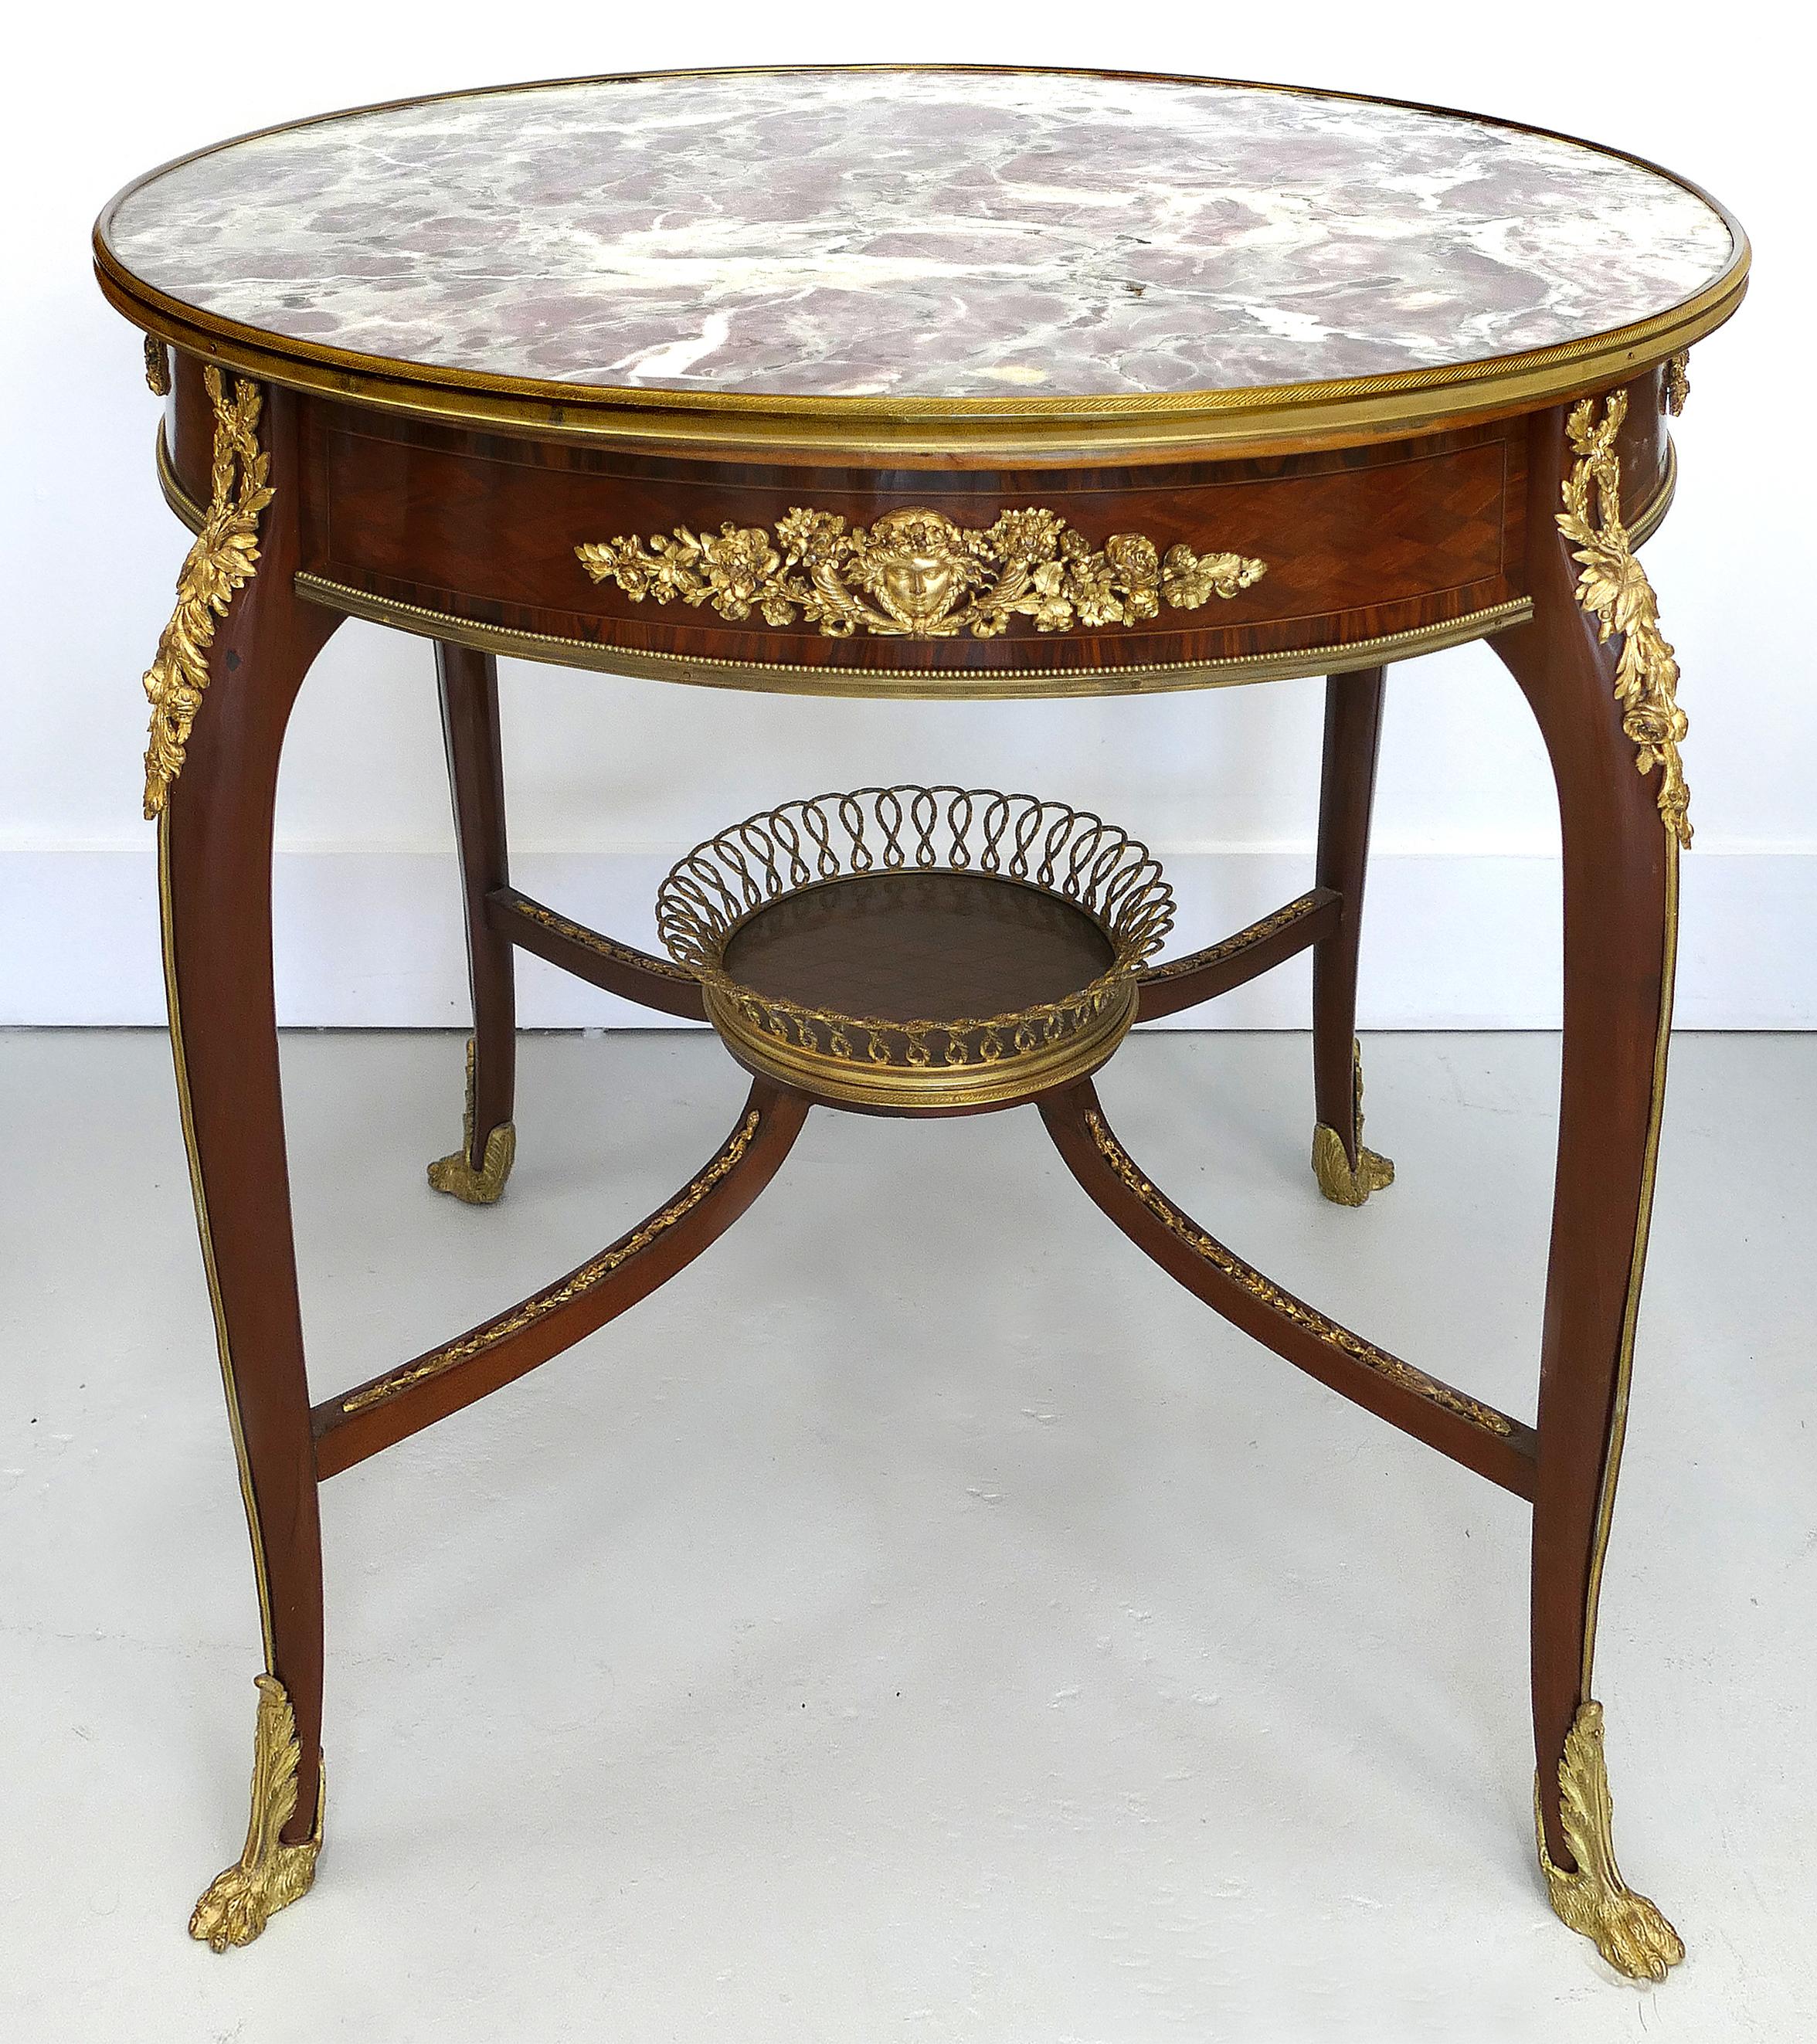 Francois Linke center table with bronze basket and mounts, France circa 1880

Offered for sale is a Francois Linke (1855-1846) Louis XV style center table from France, circa 1880.
The late 19th century table is mounted with ornate gilt bronze